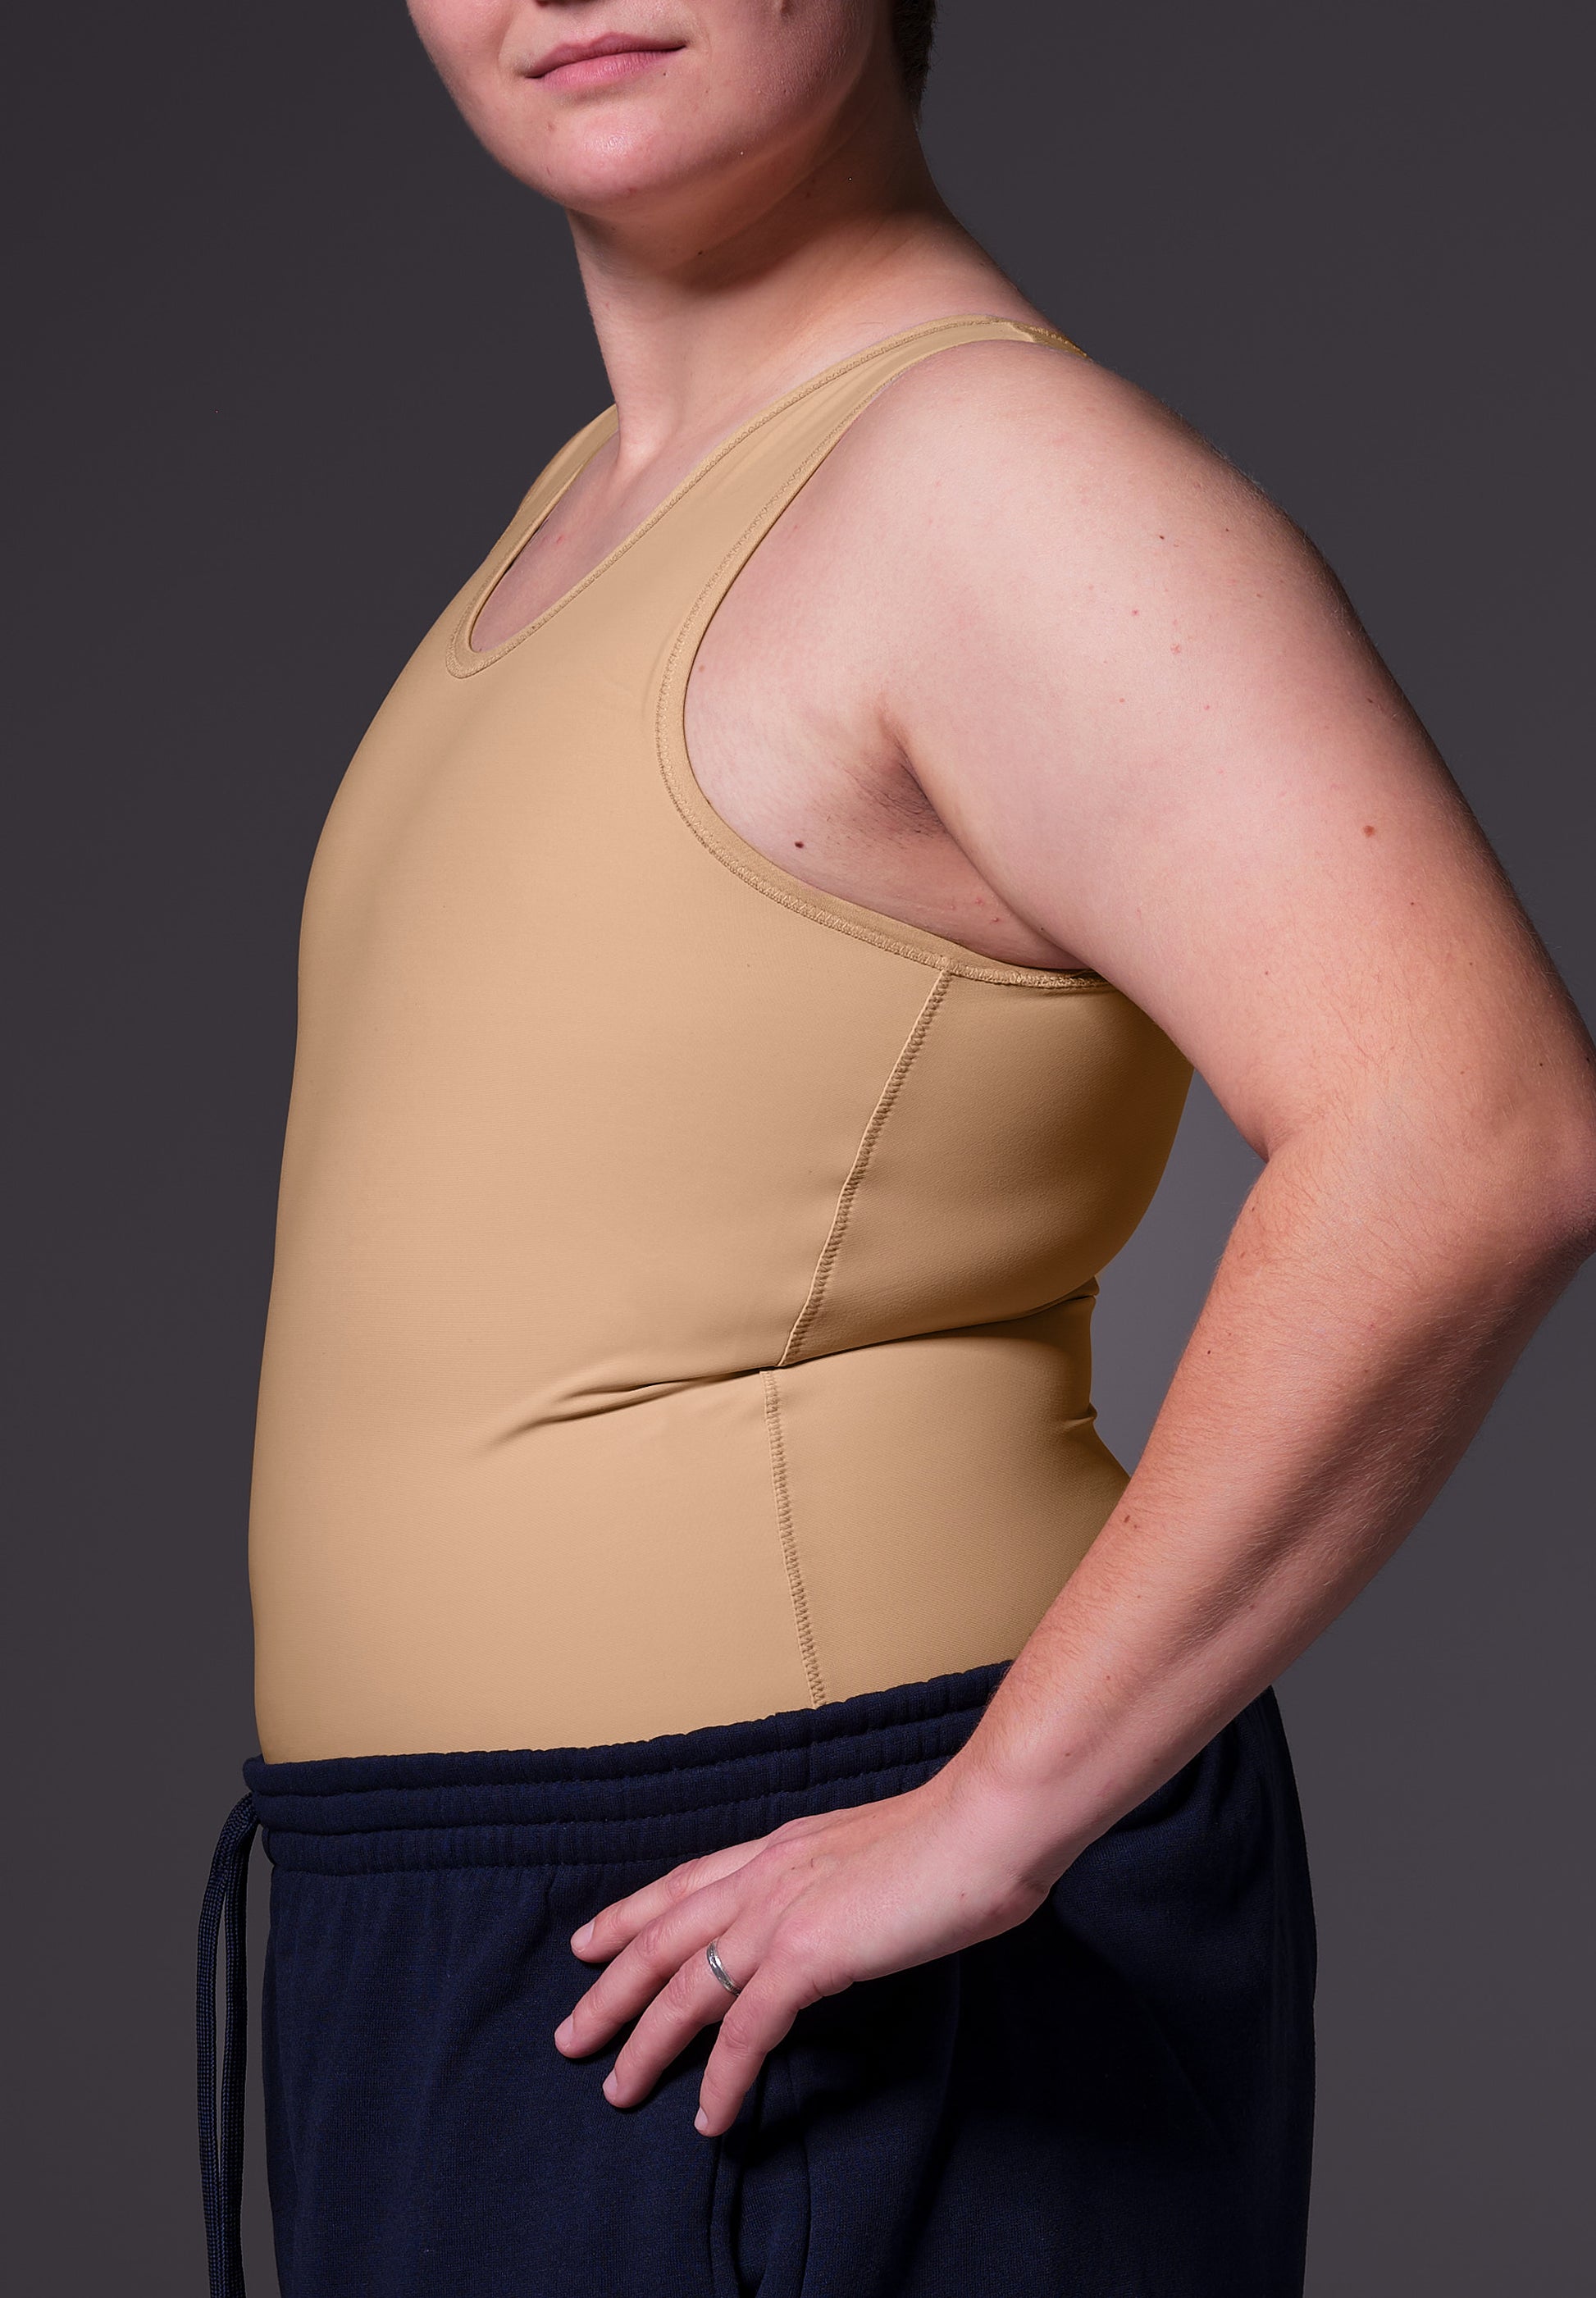 Deven is wearing the Shirt Binder in the color Caramel, seen from the side